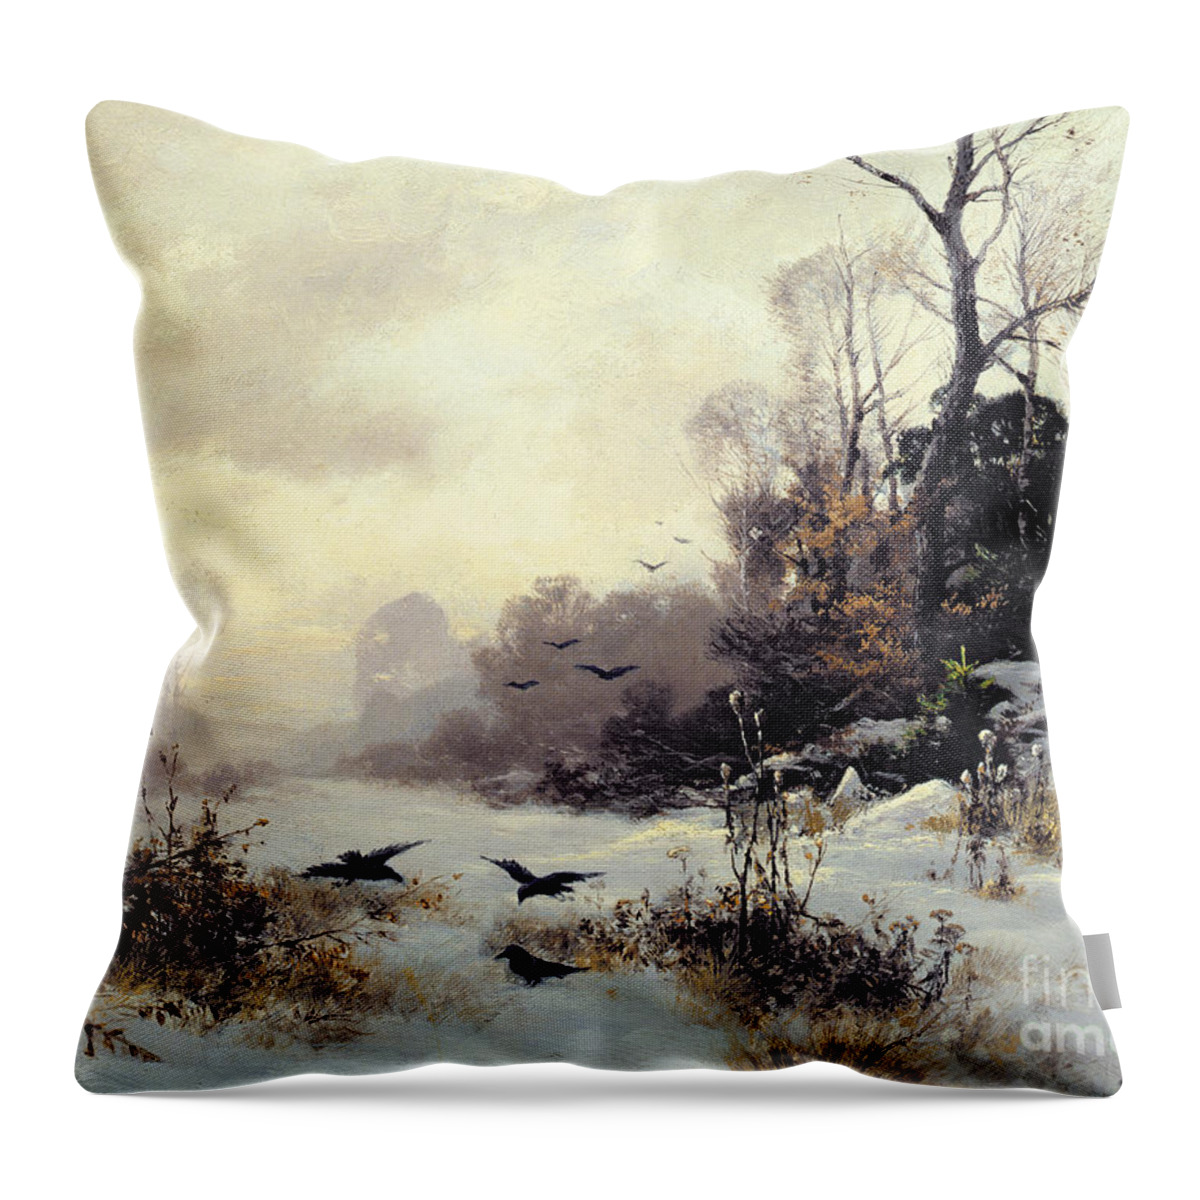 Snow Throw Pillow featuring the painting Crows in a Winter Landscape by Karl Kustner